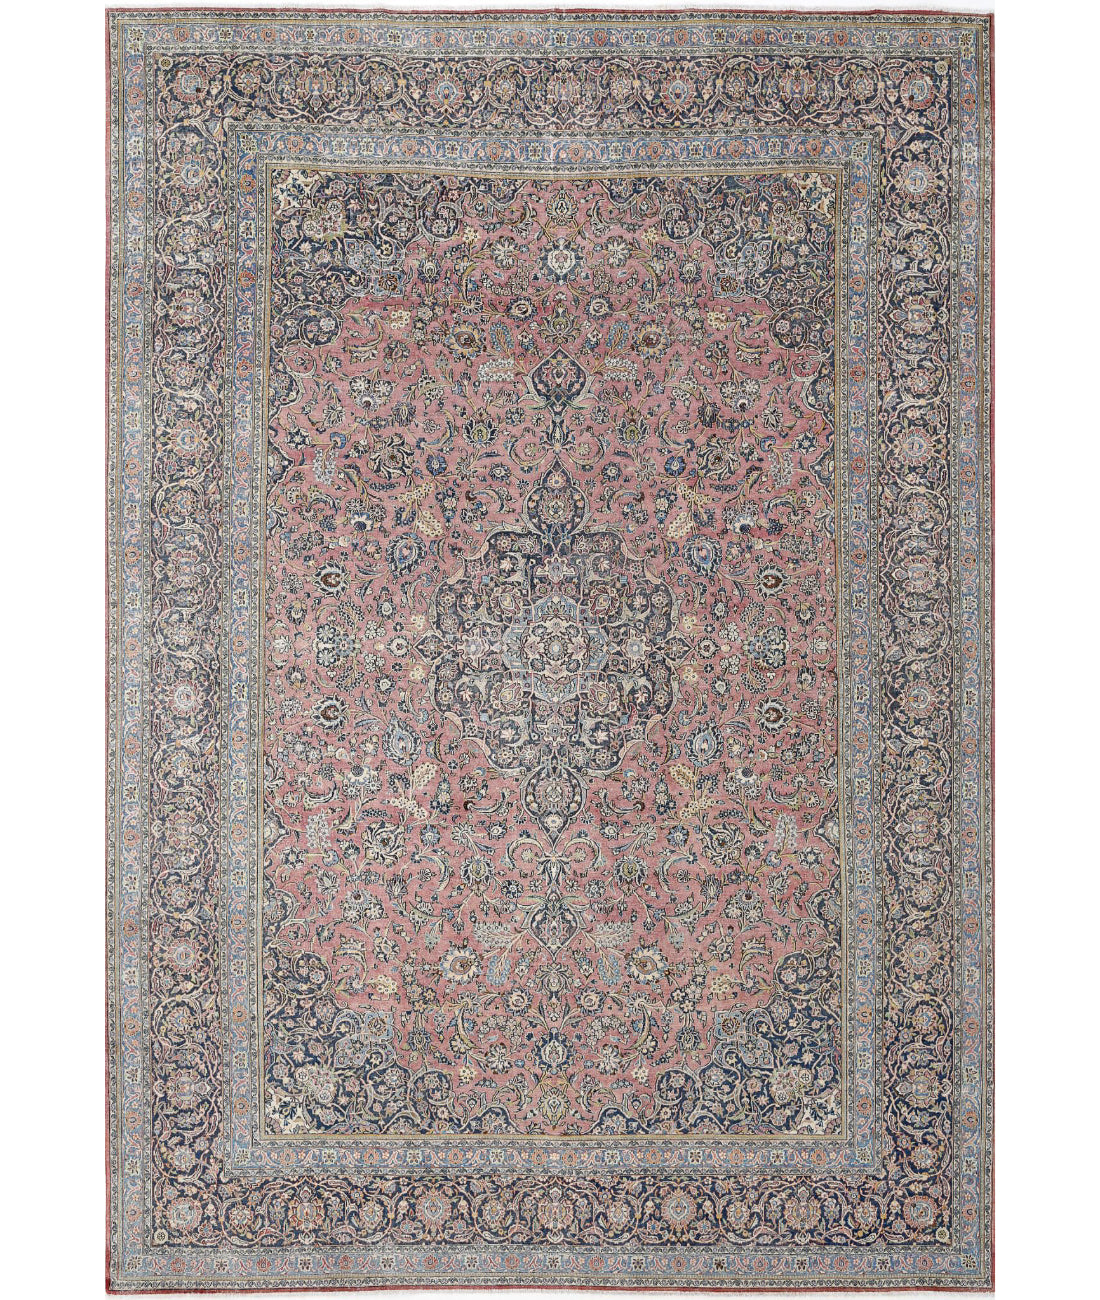 Hand Knotted Vintage Persian Kashan Wool Rug - 11'10'' x 17'3'' 11'10'' x 17'3'' (355 X 518) / Red / Blue